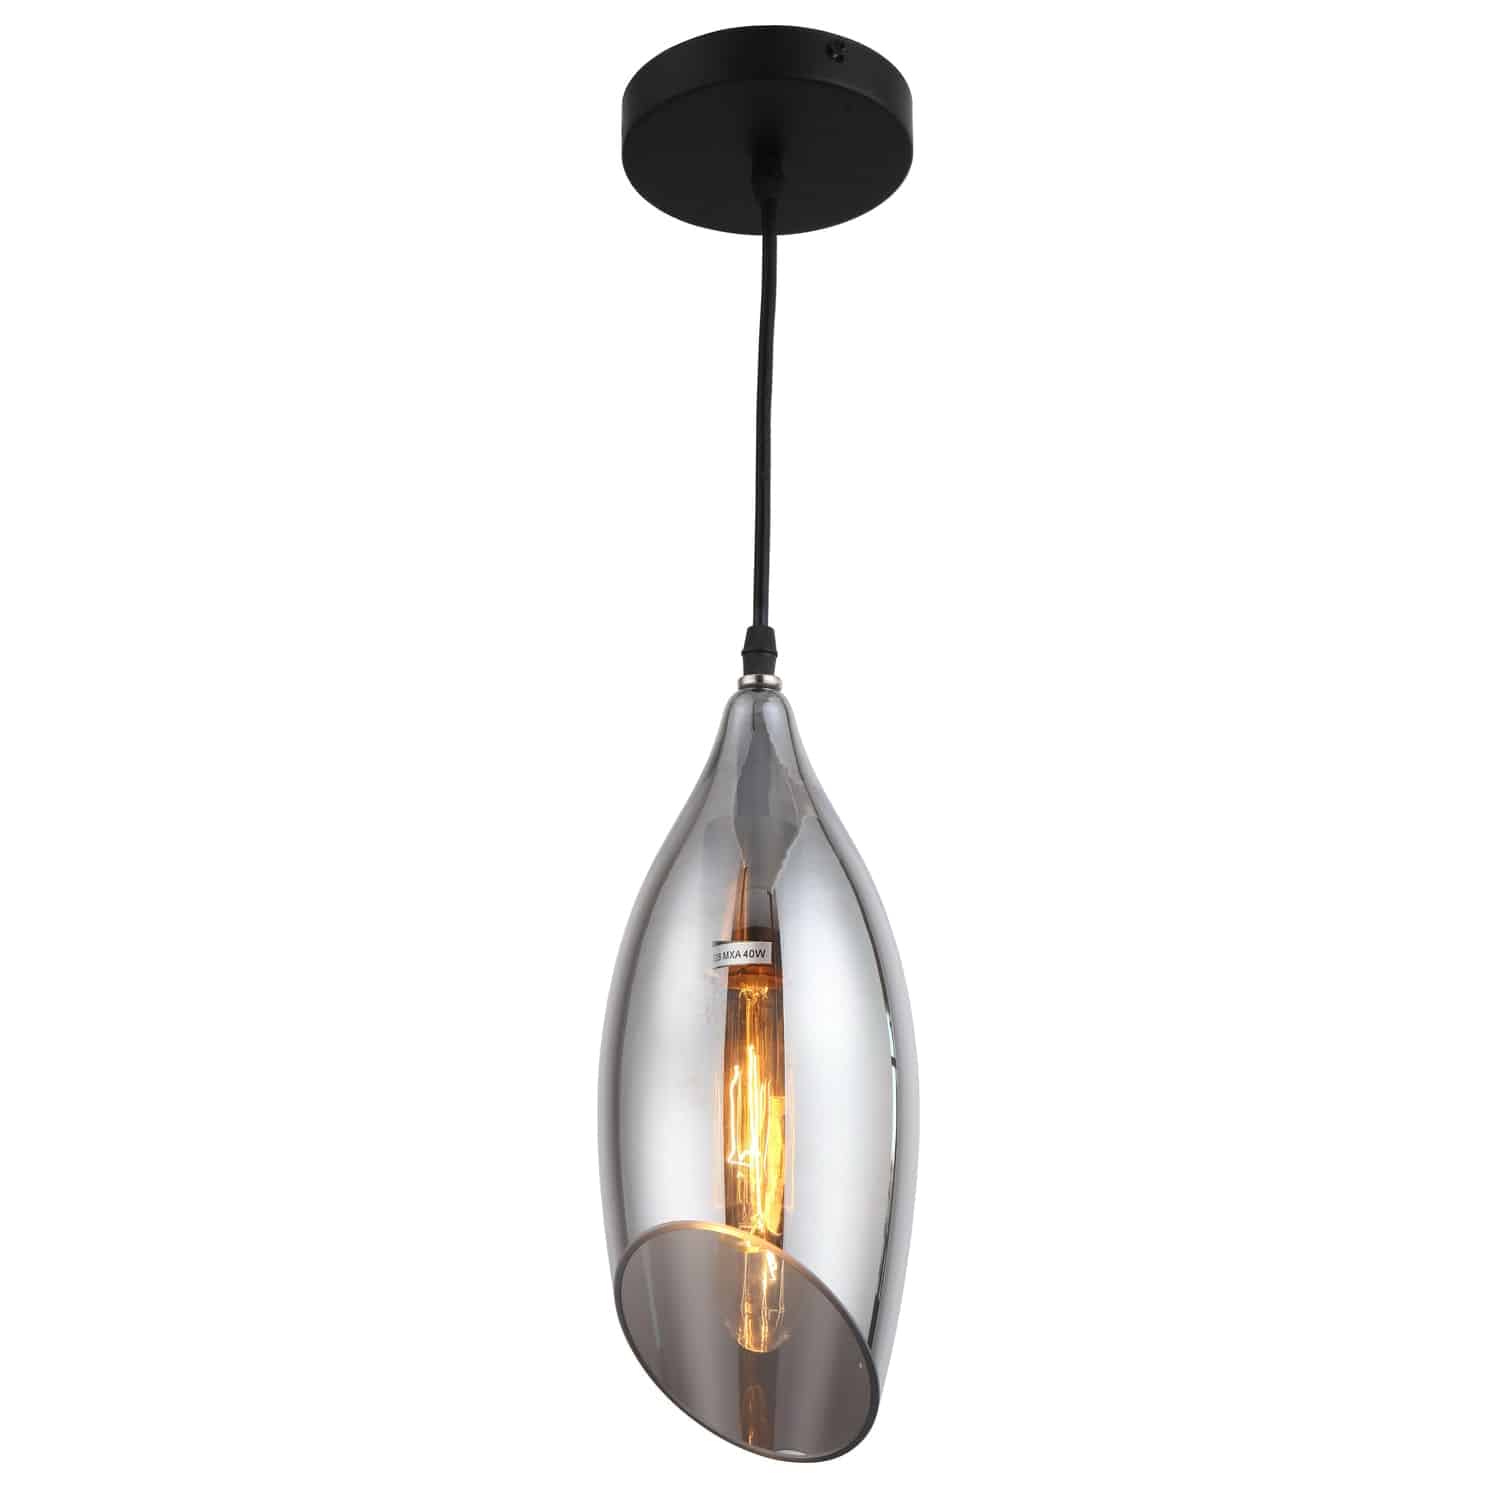 1 Light Incandescent Pendant, Black Finish with Smoked Glass